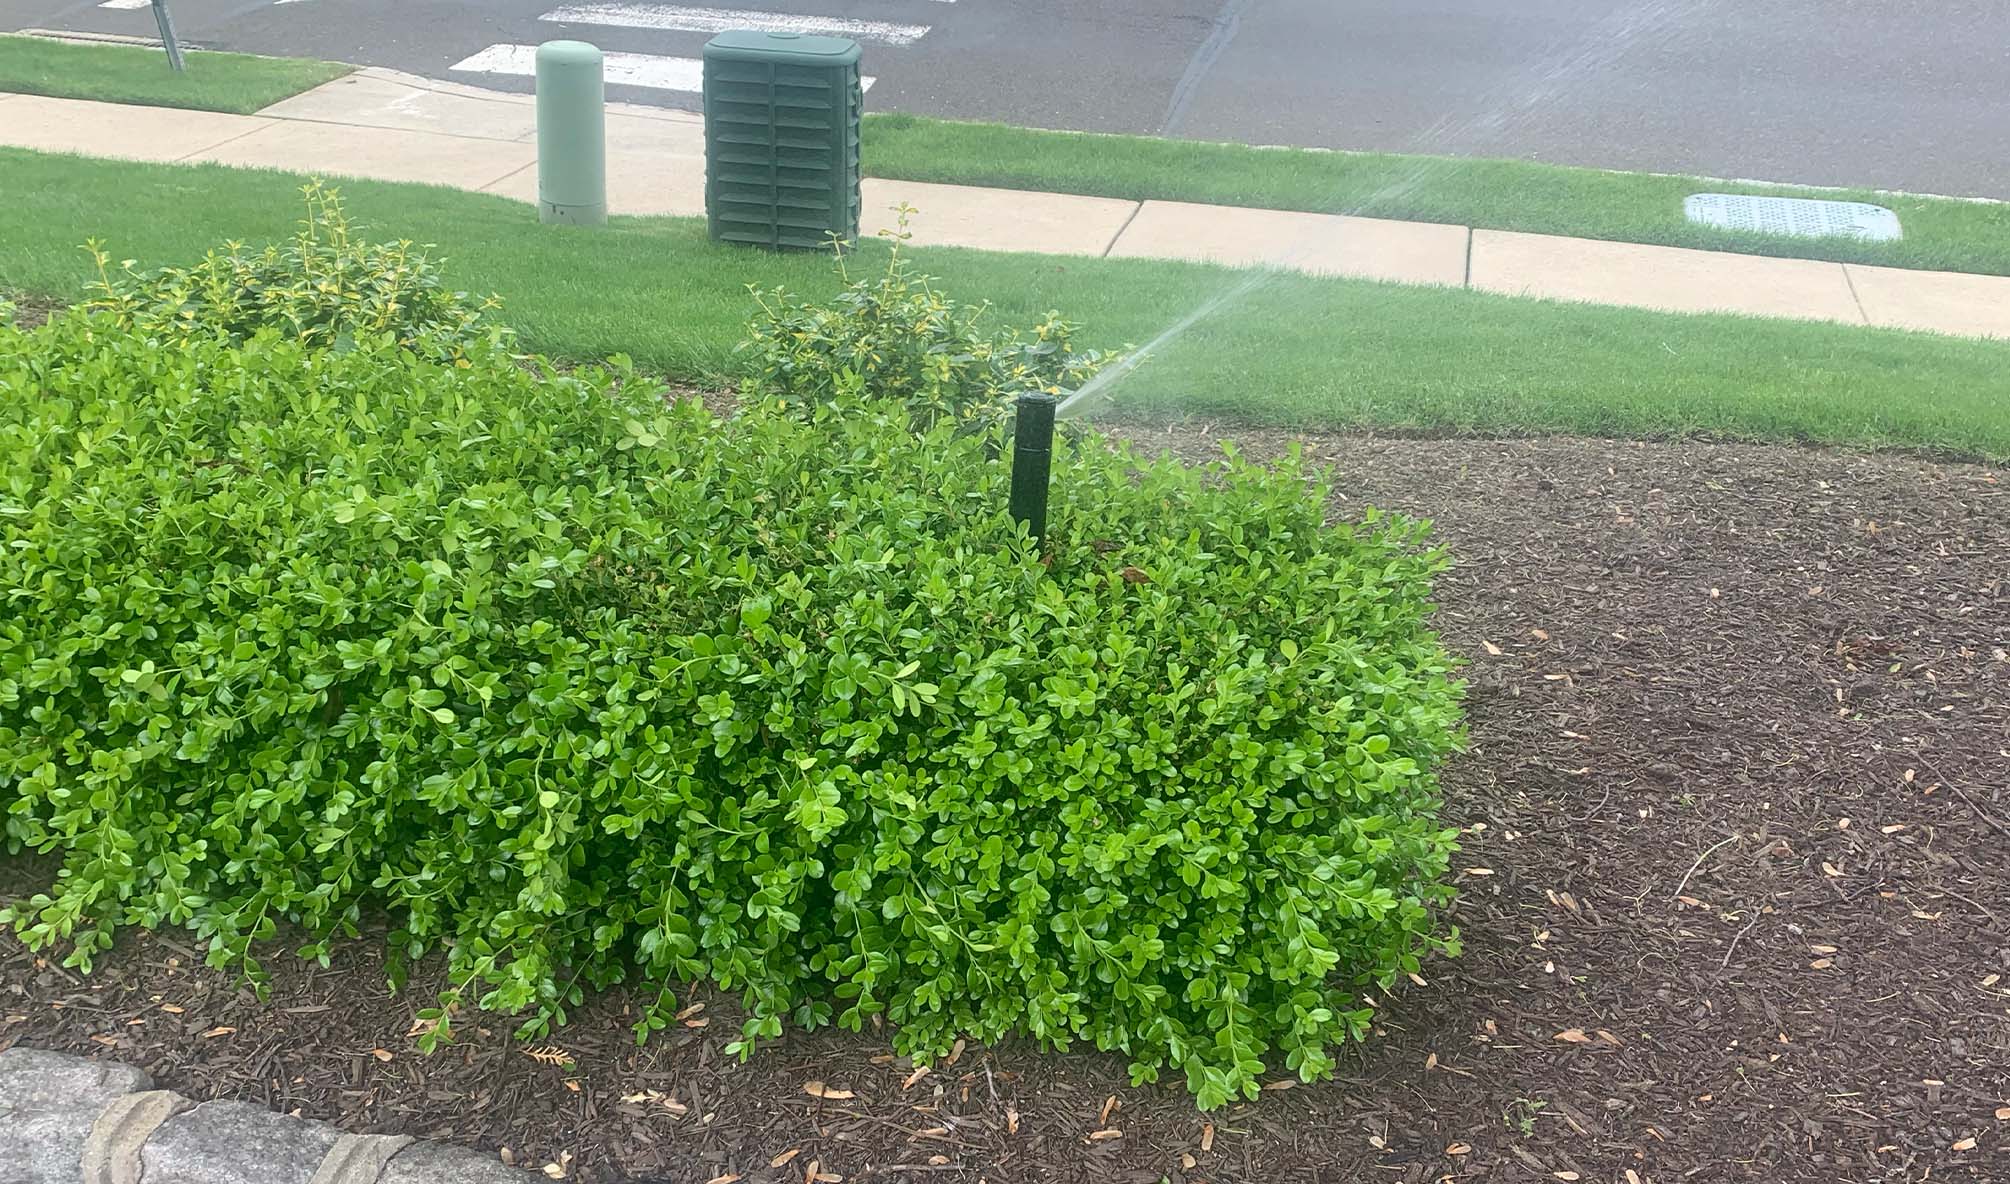 Irrigation Sprinklers Set To On Near Some Front Yard Bushes